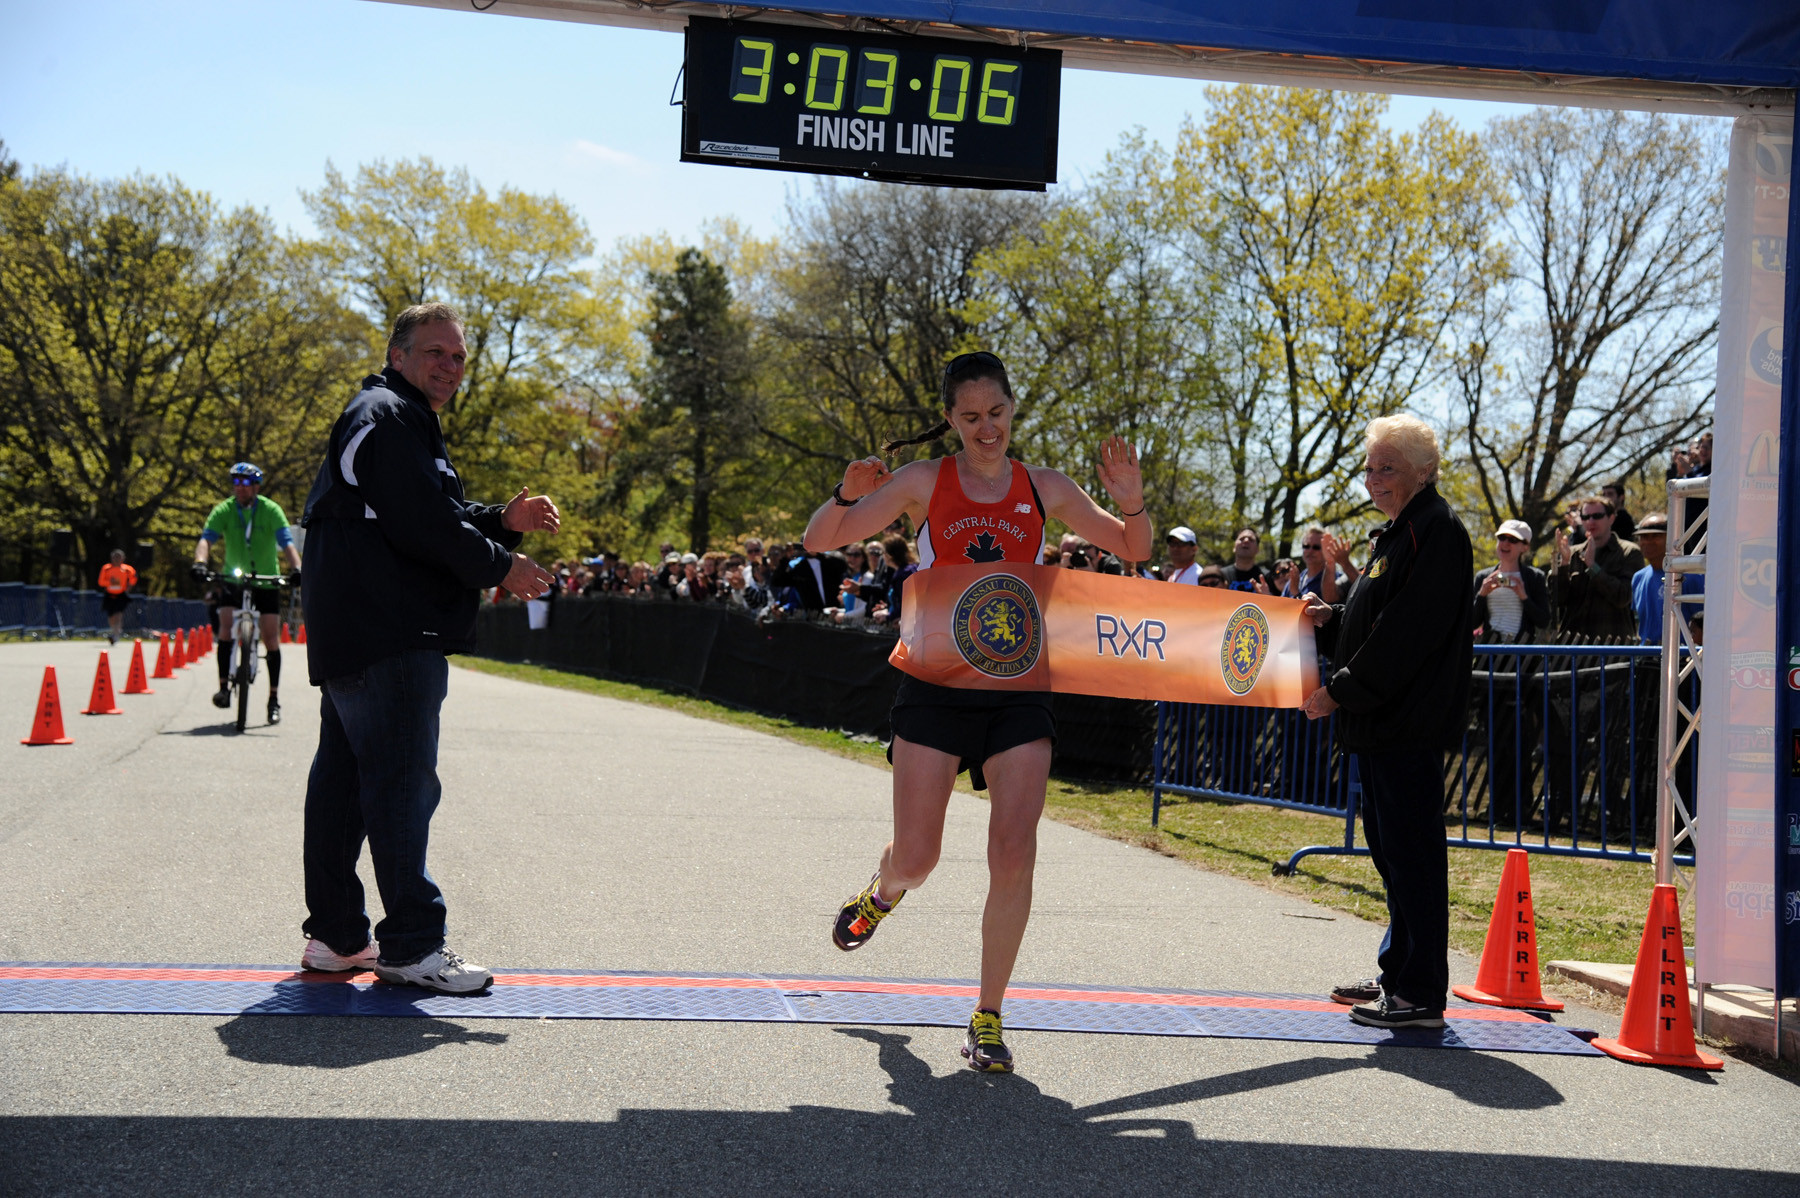 Kelly Gillen, 30, from New York City, finished first among the women at 3 hours, 3 minutes.